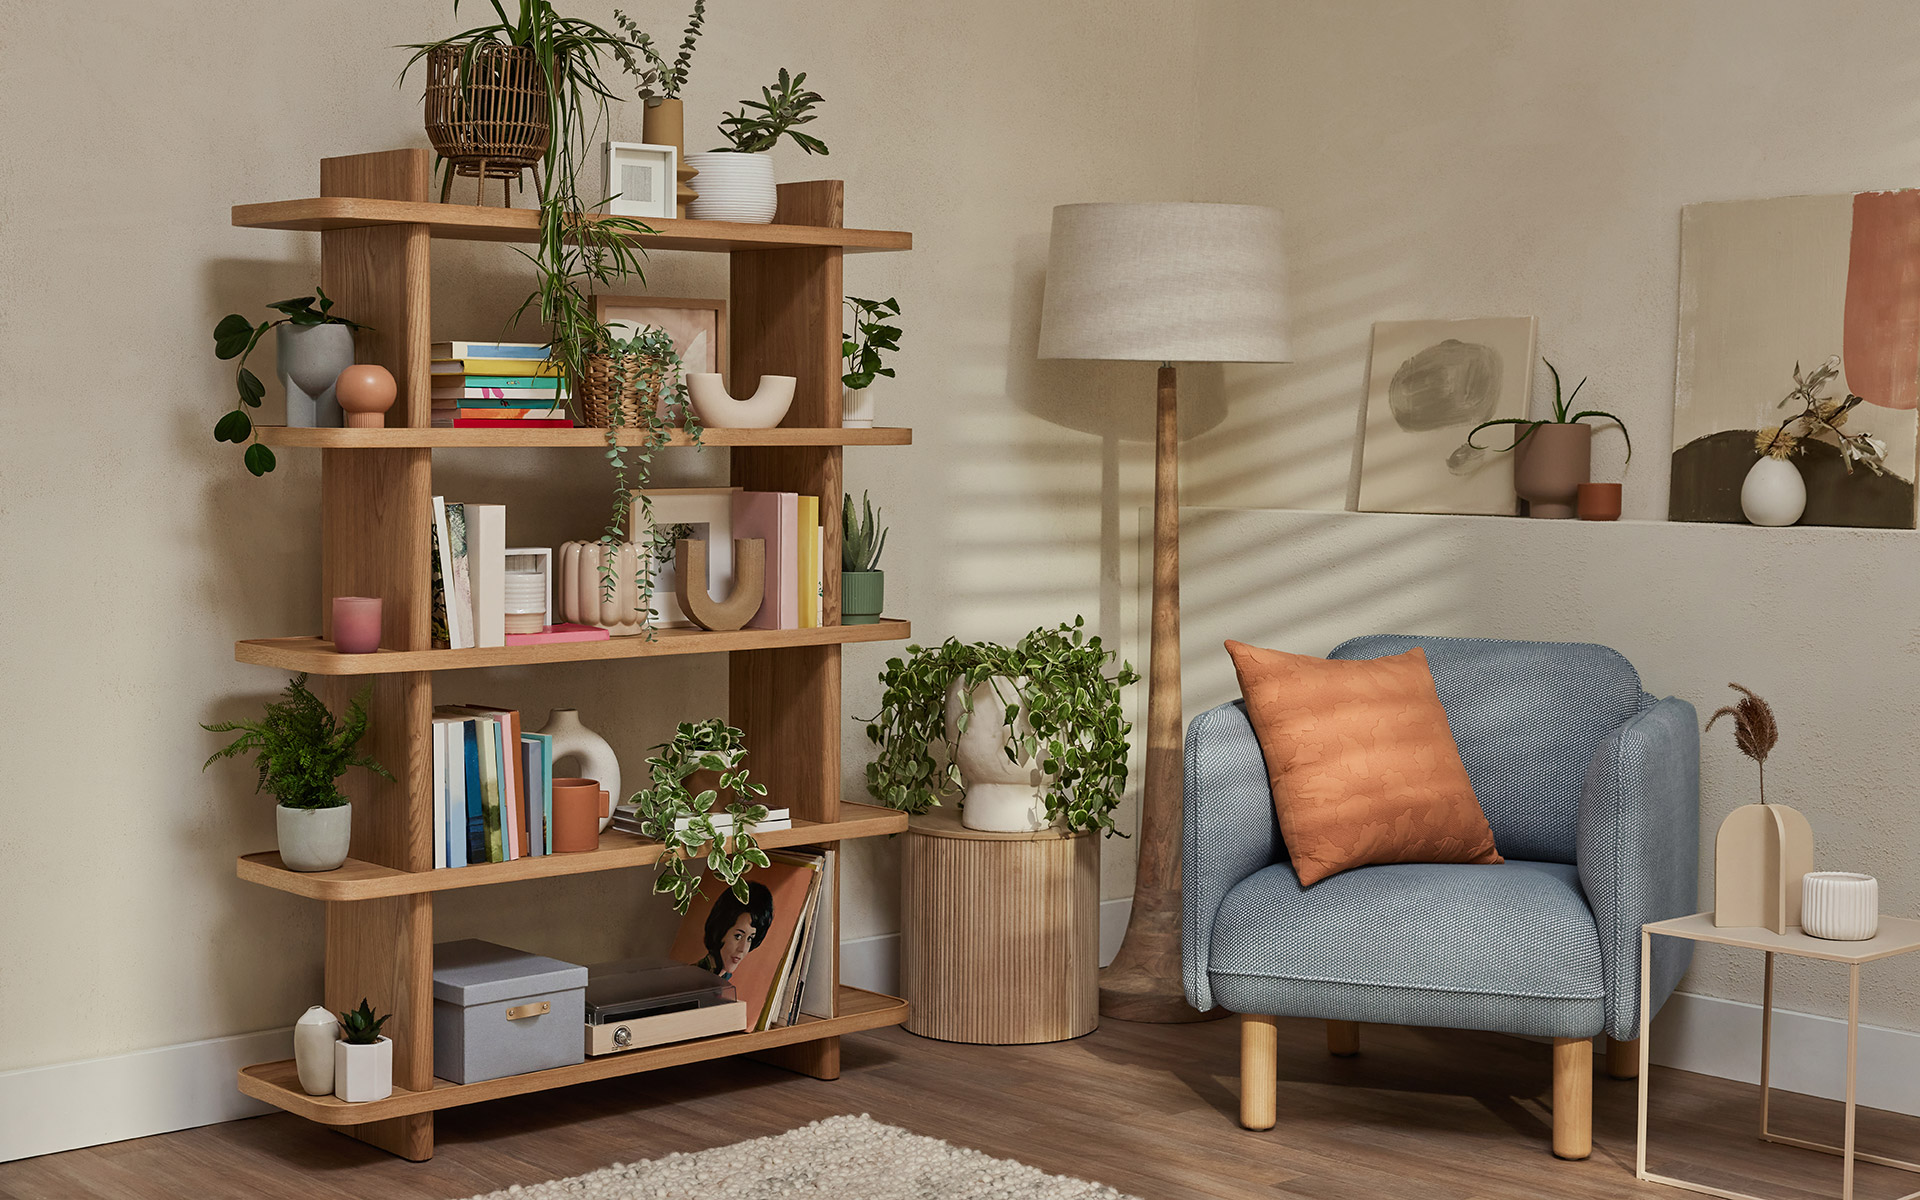 great example of boho furniture is the Koala bookshelf with armchair, plants and other collectables in a lounge room